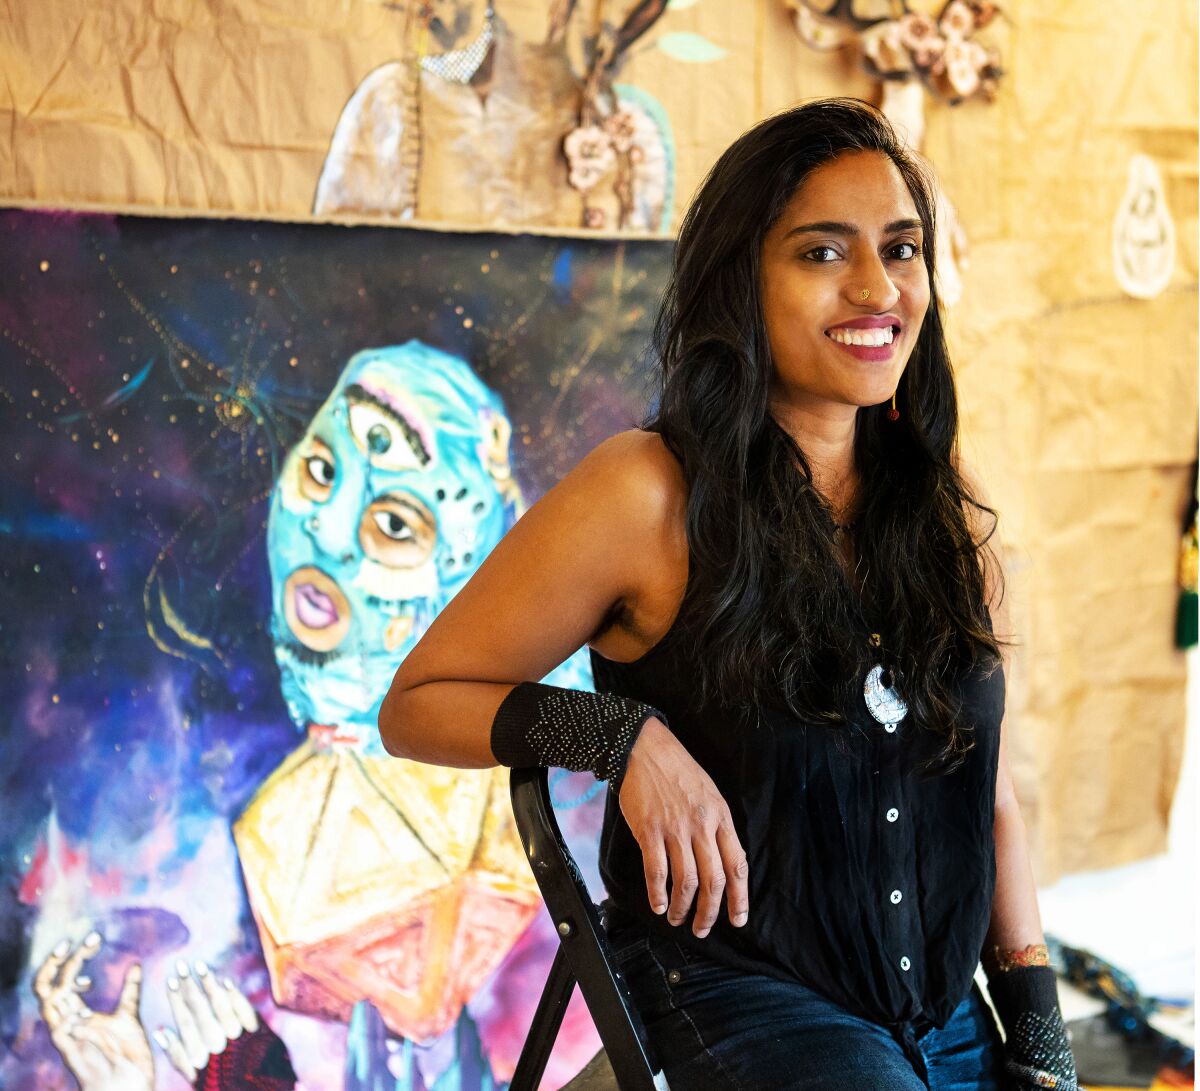 Chitra Ganesh is the artist for “Resurgence," the latest installation in the Murals of La Jolla program.